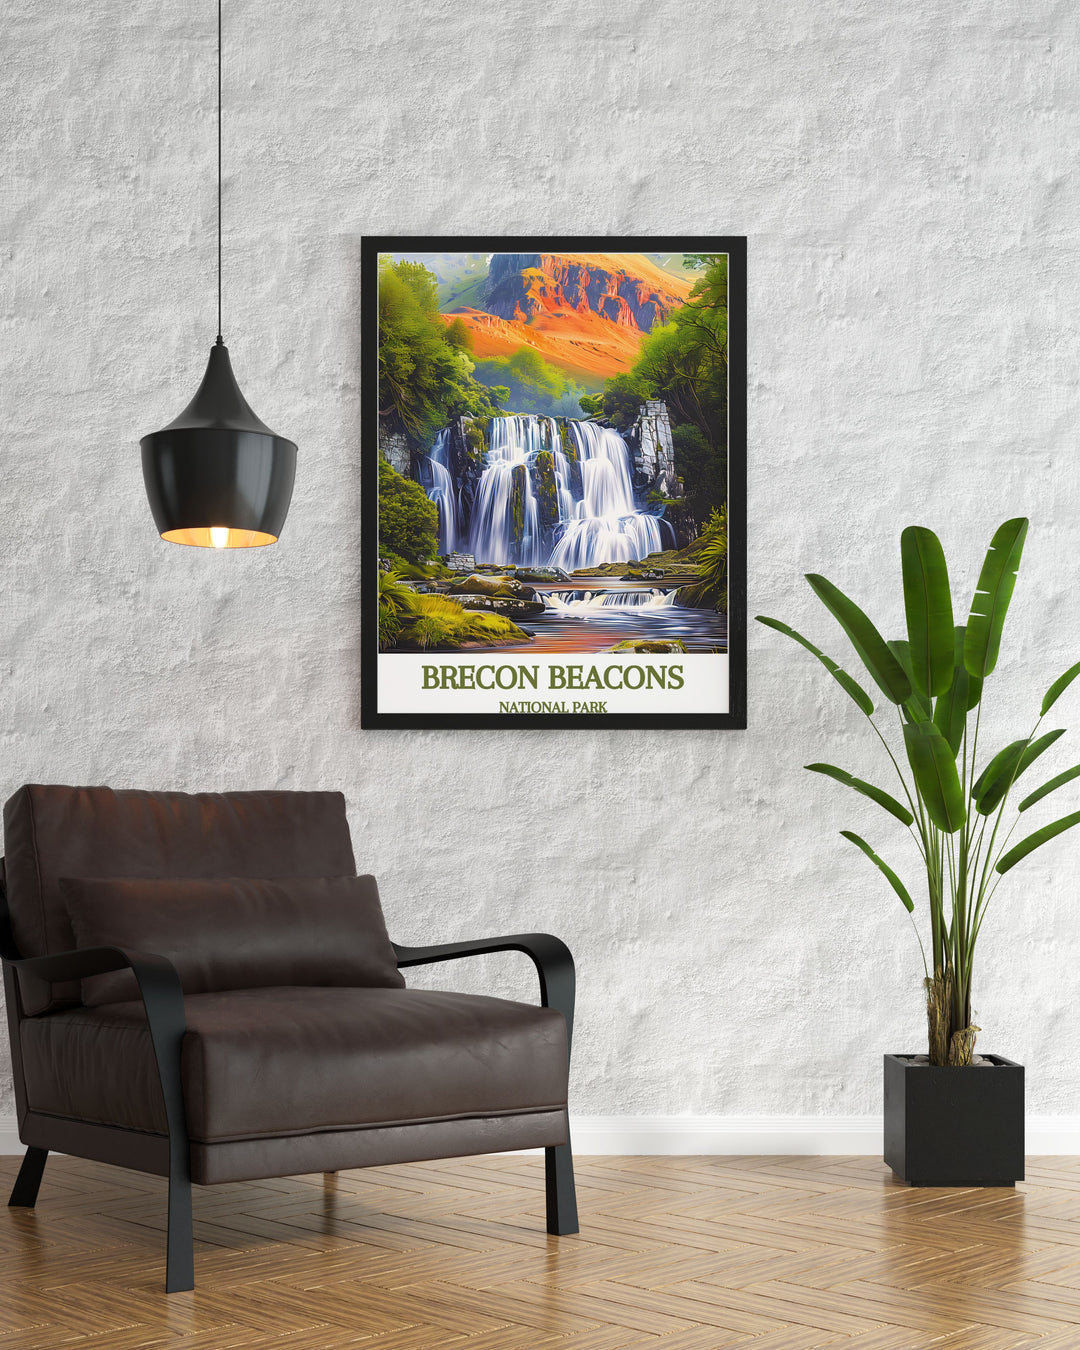 Custom print of Brecon Beacons Falls, offering personalized options to suit your taste. Tailor the color palette and framing to create a unique piece that perfectly complements your home decor and personal style.